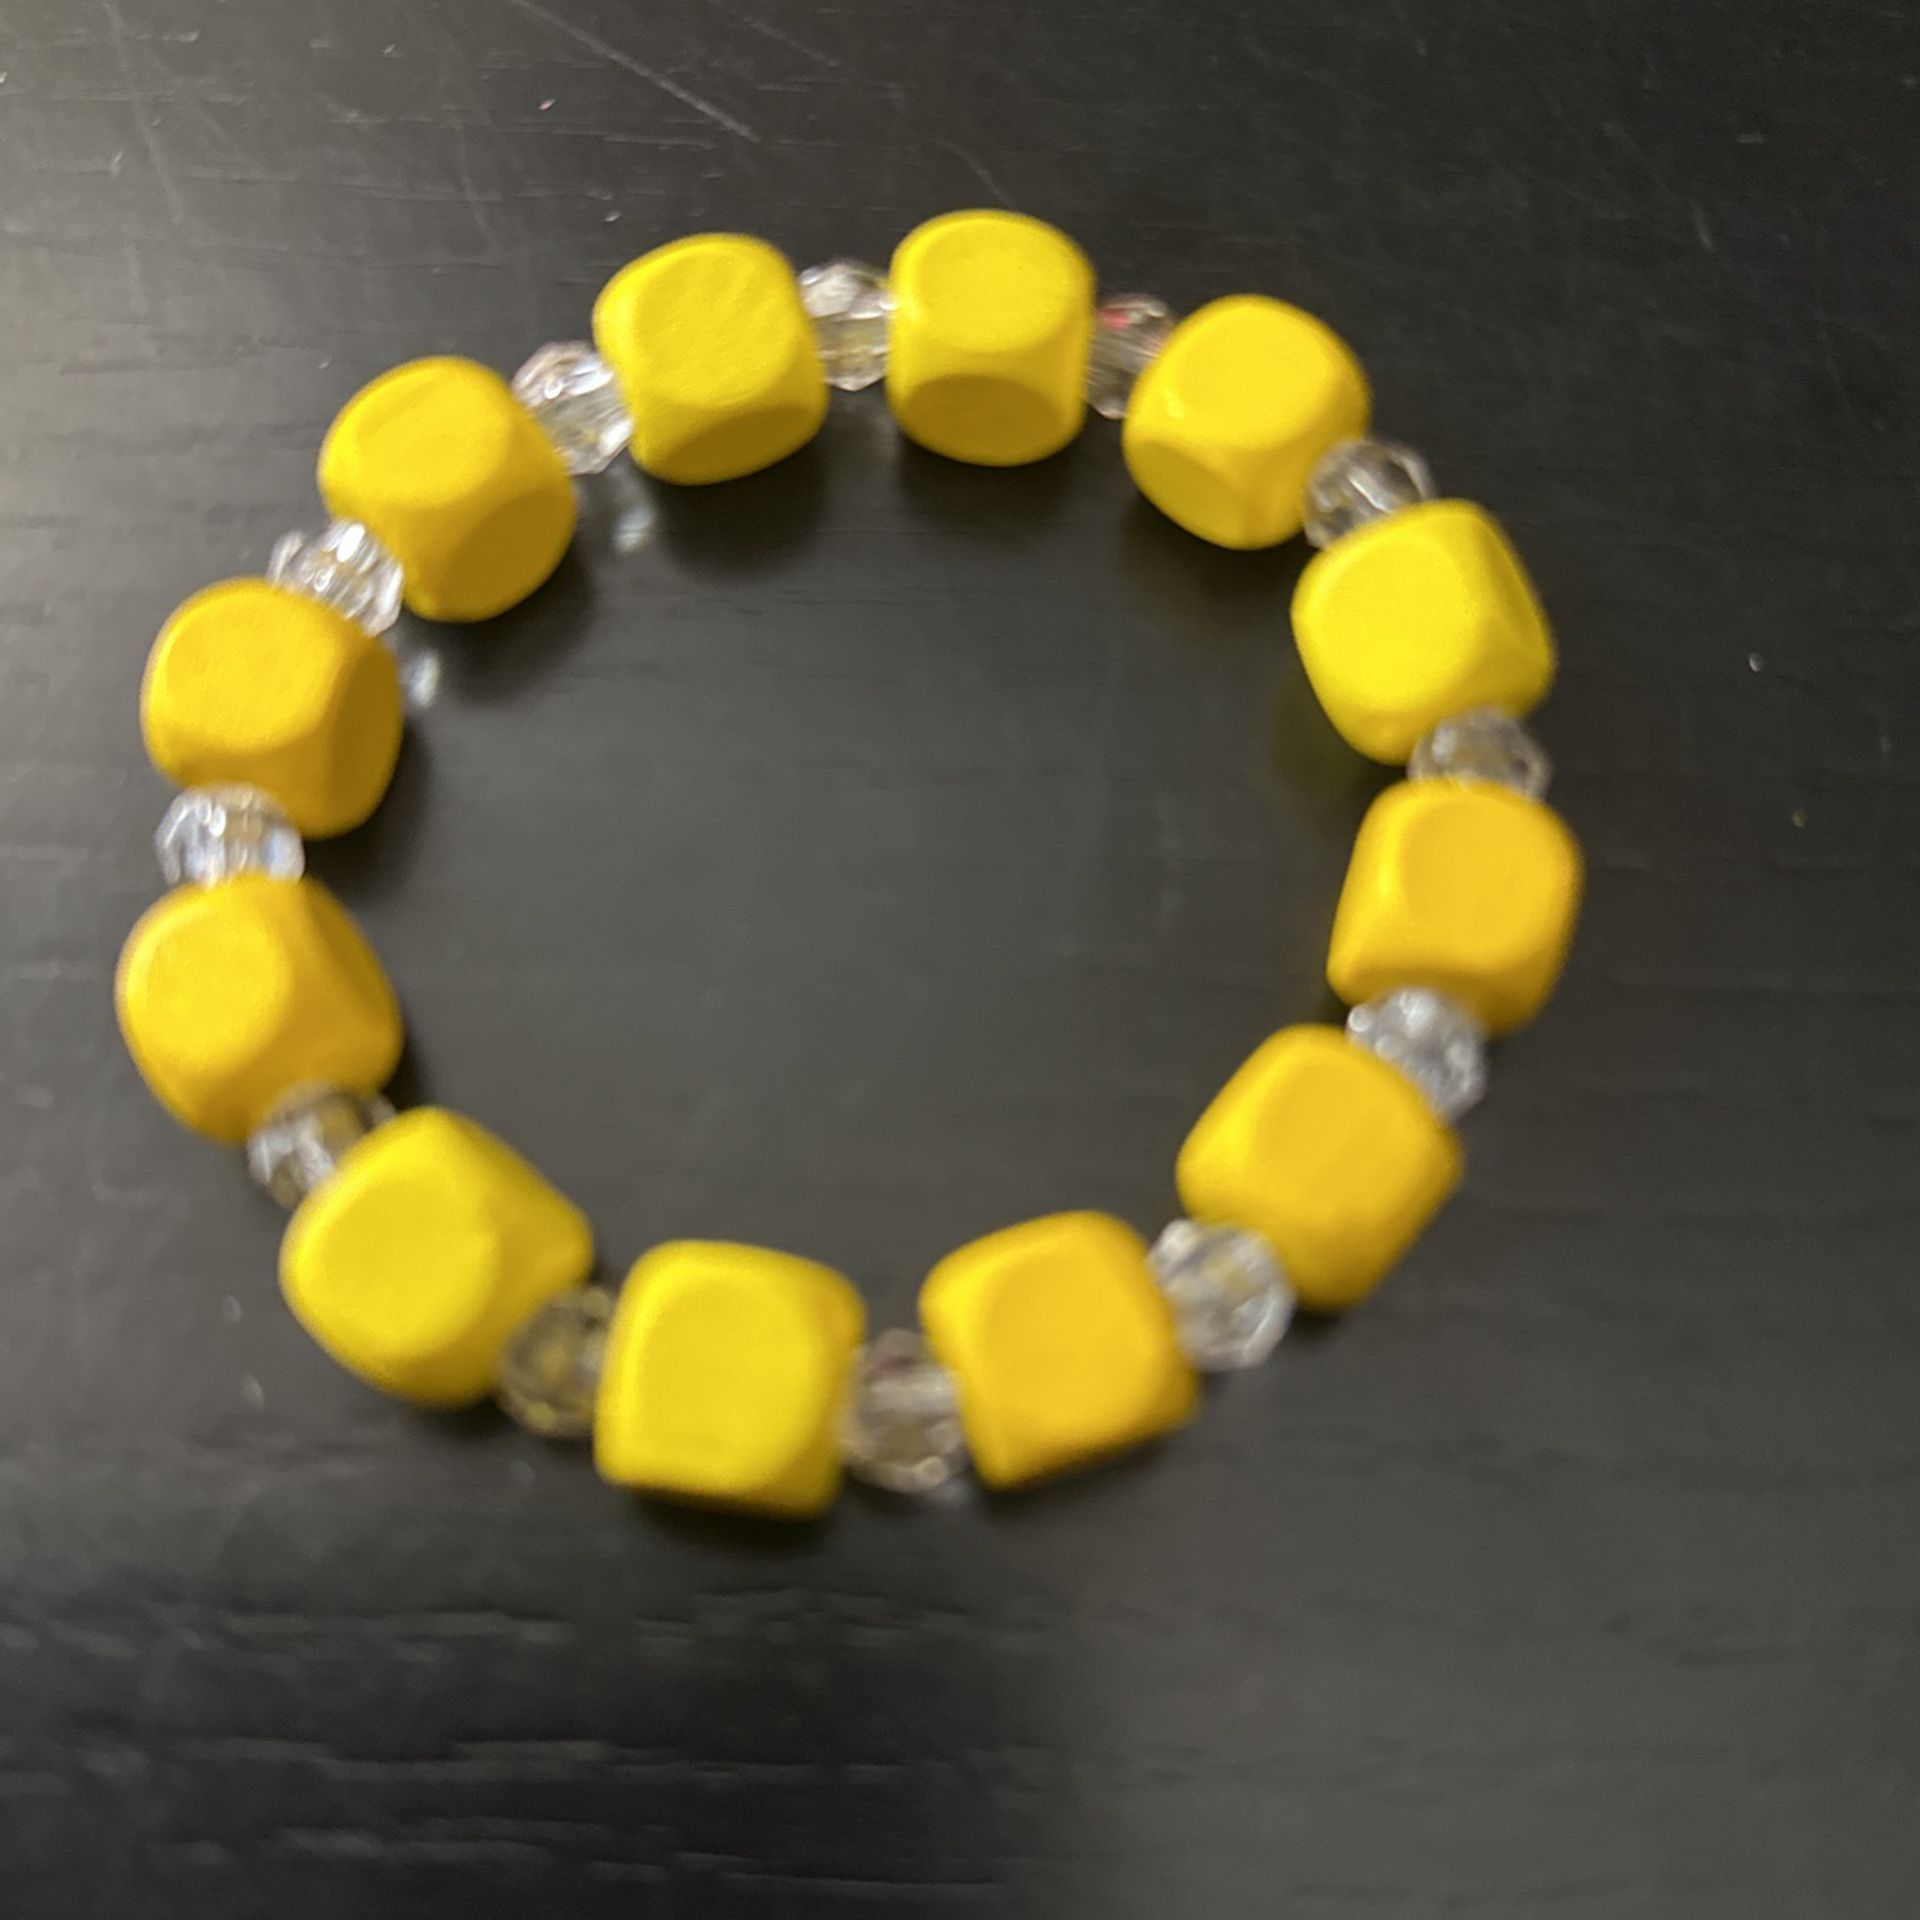 Yellow Square Bead With Clear Beads Bracelet